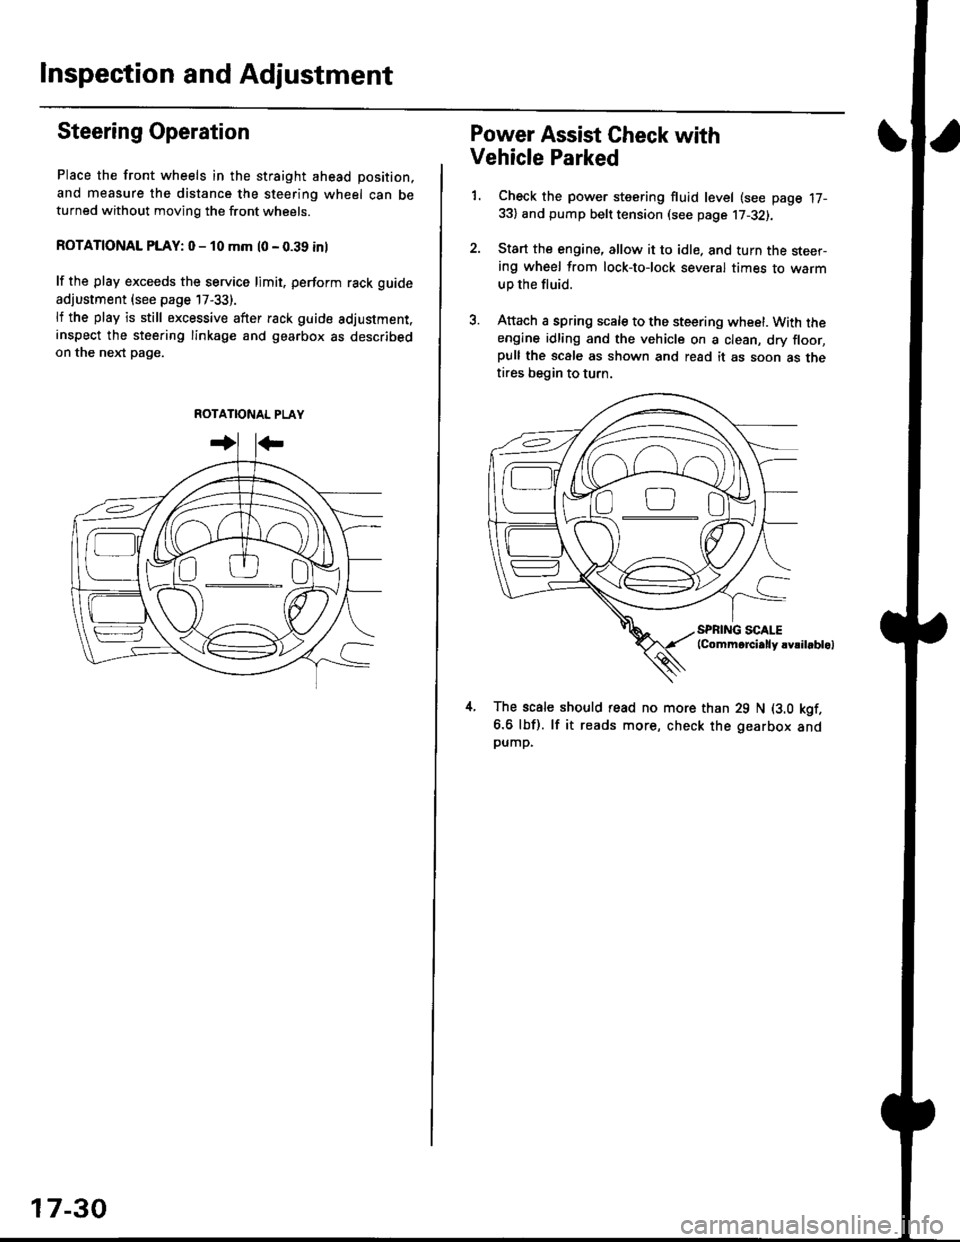 HONDA CIVIC 1998 6.G Owners Manual Inspection and Adjustment
Steering Operation
Place the front wheels in the straight ahead position,
and measure the distance the steering wheel can beturned without moving the front wheels.
ROTATIONAL